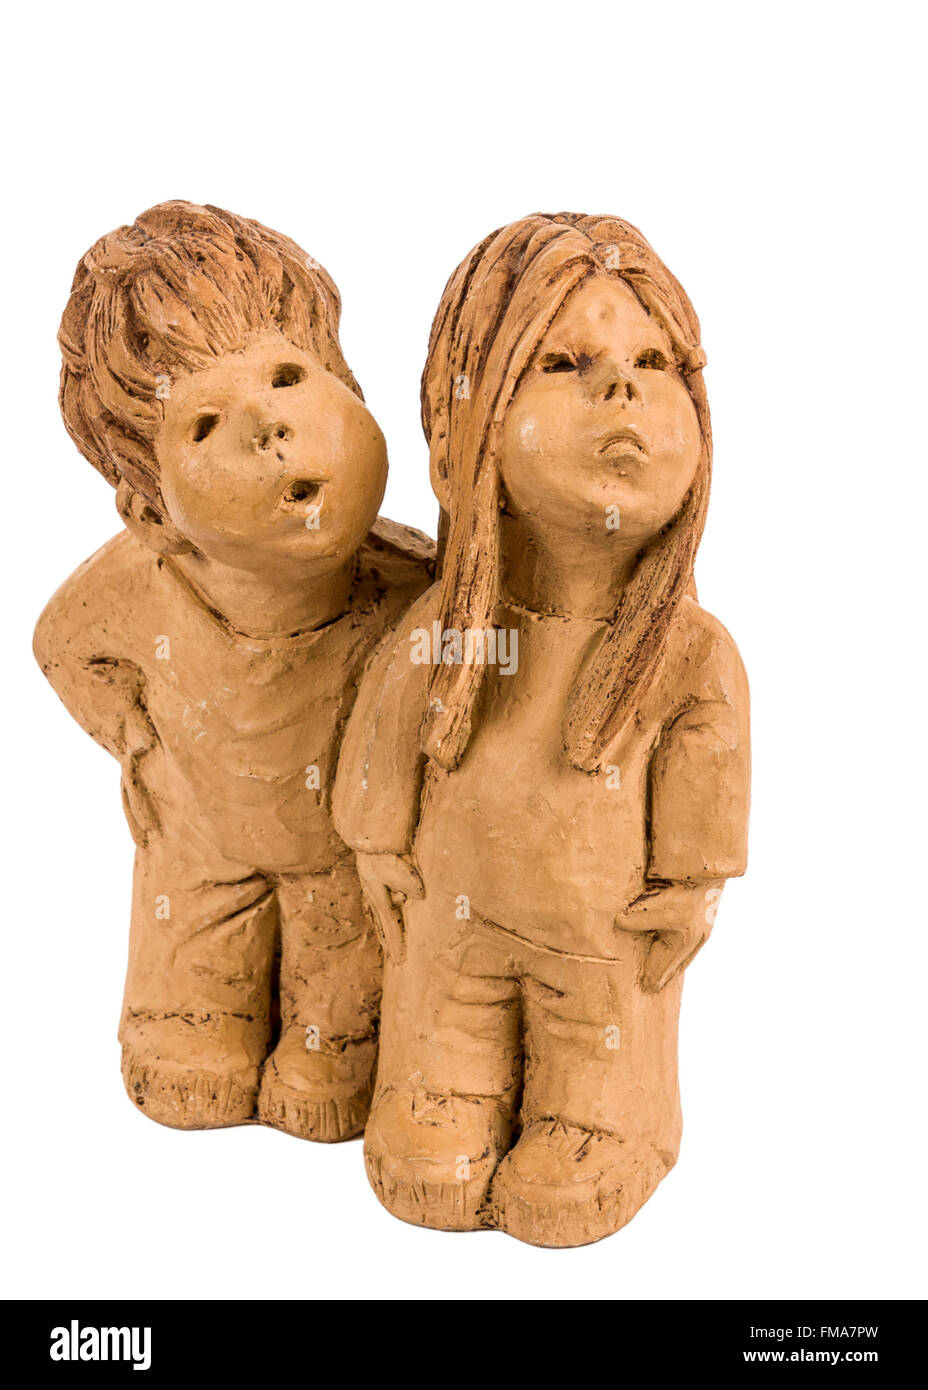 Lee Bortin clay sculpture of two young children looking up isolated on white background  Model Release: No.  Property Release: No. Stock Photo